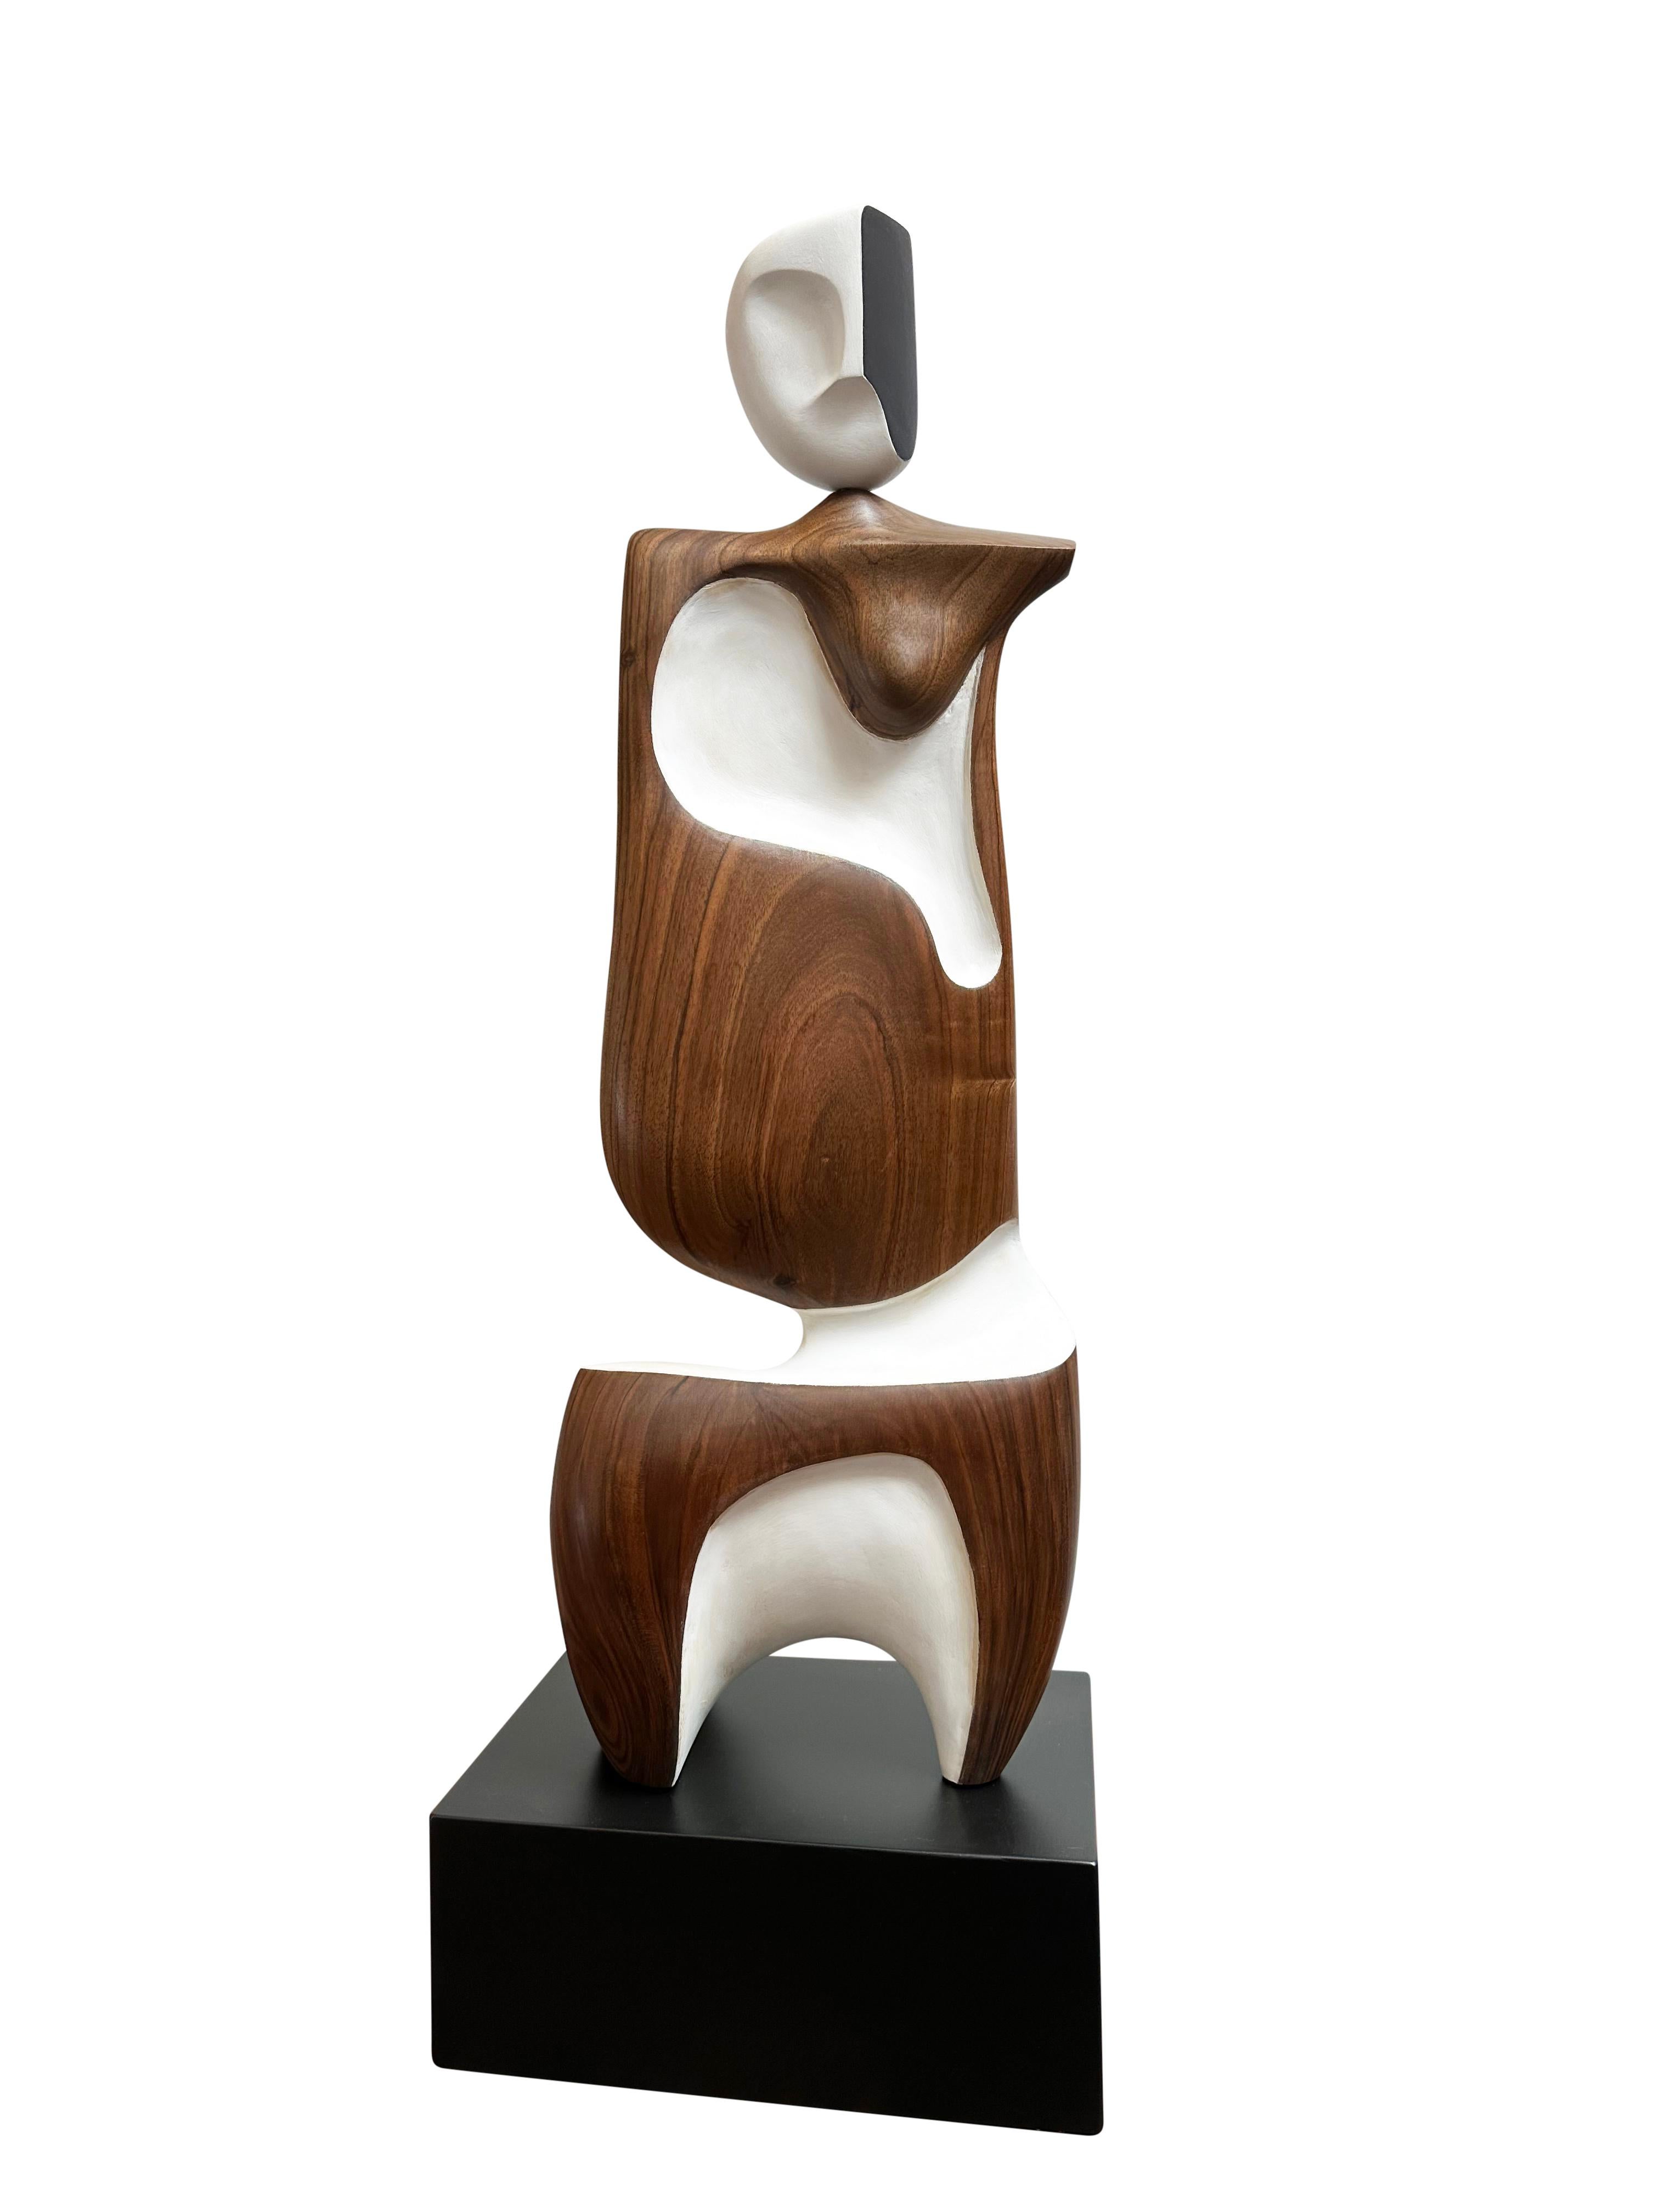 This masterwork is exhibited in the Zimmerman Gallery, Carmel CA.

About The Artist:
Jim Coleman is an up-and-coming talent in the world of sculpture, celebrated for his out-of-the-box and unconventional creations. Unbound by the constraints of